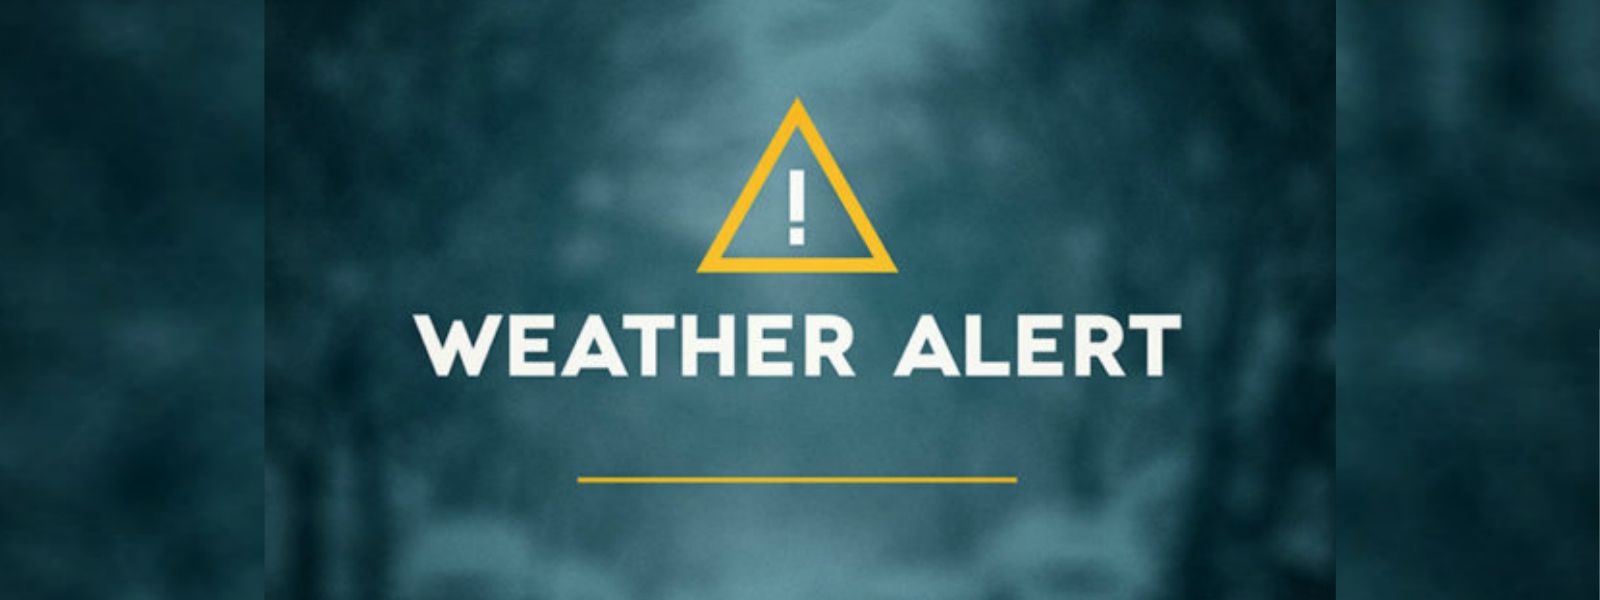 CODE RED : Weather warning issued for heavy rain